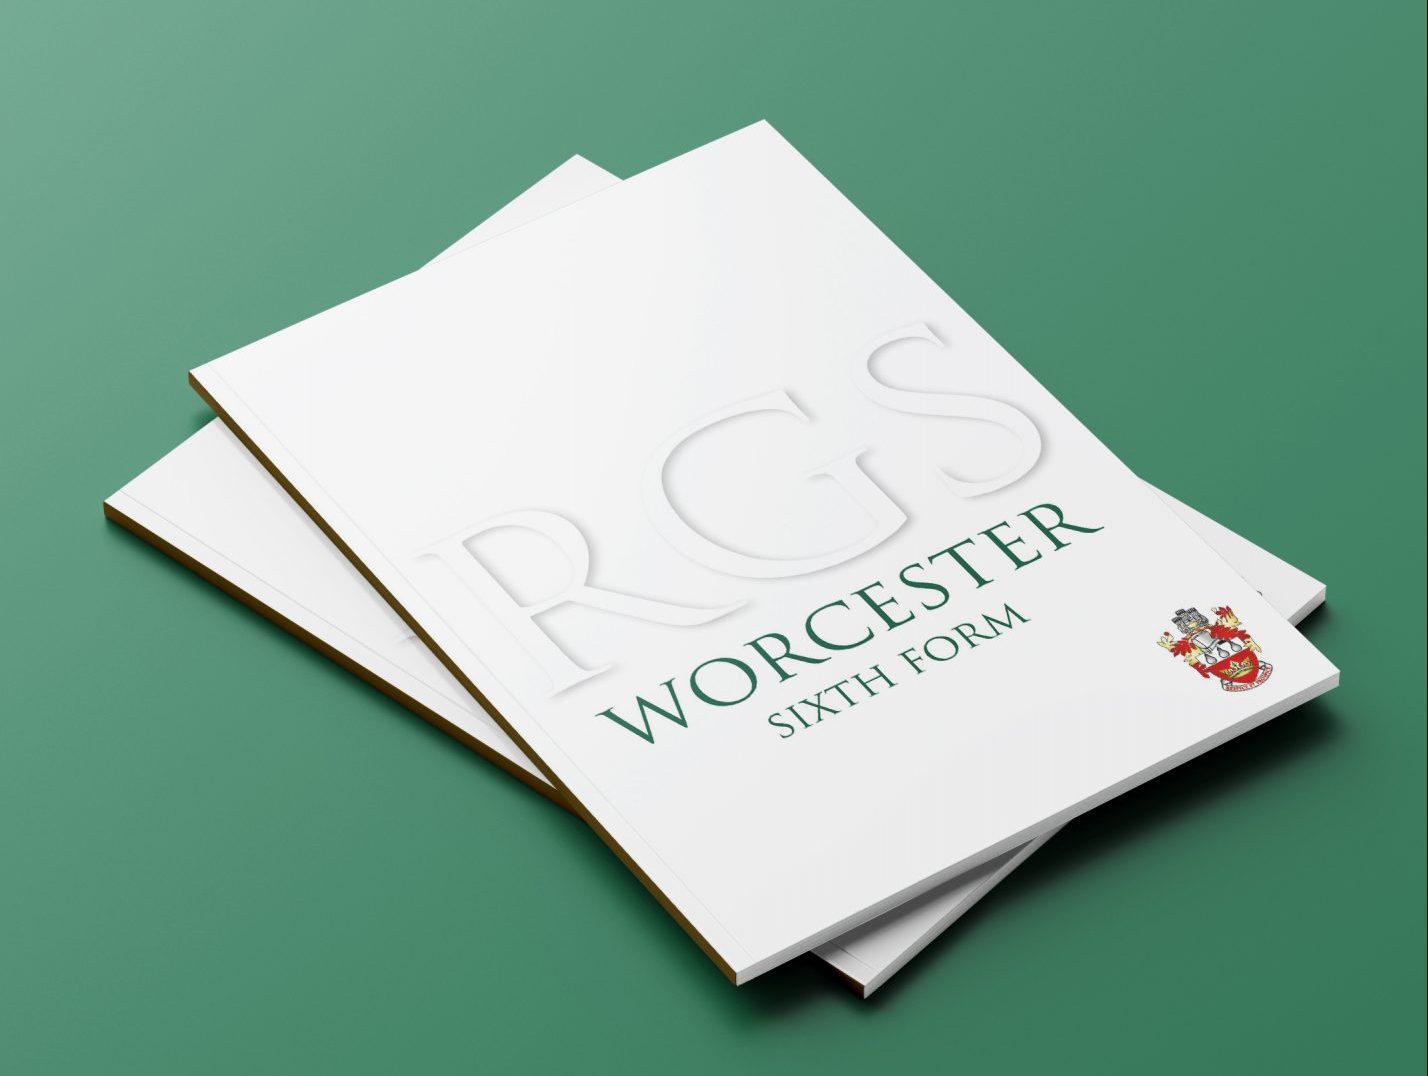 Sixth for prospectus mock up